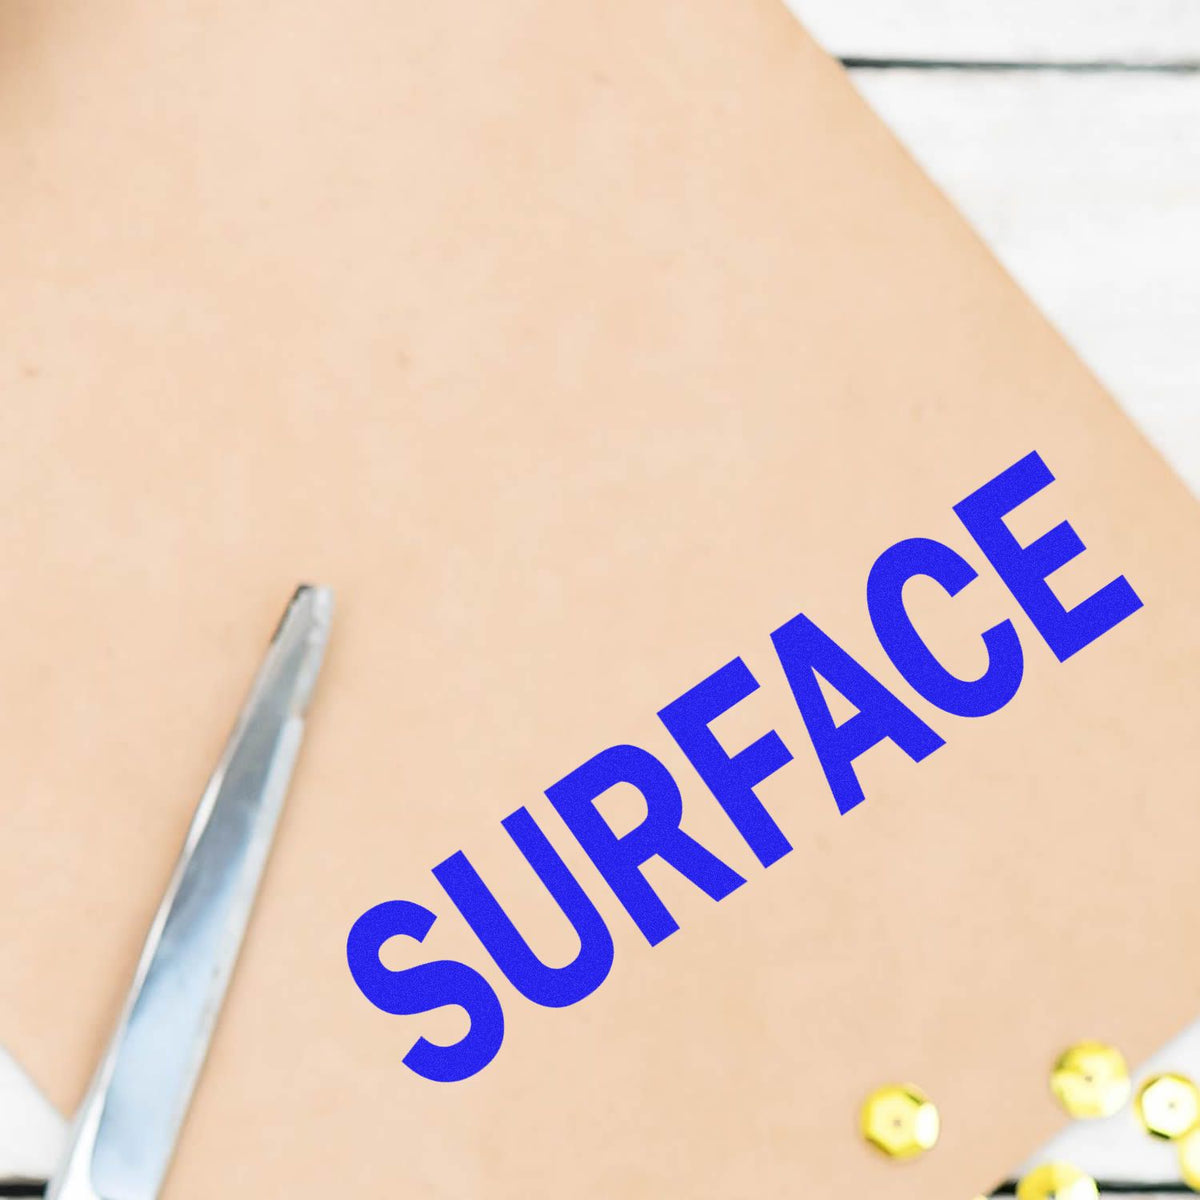 Large Surface Rubber Stamp In Use Photo